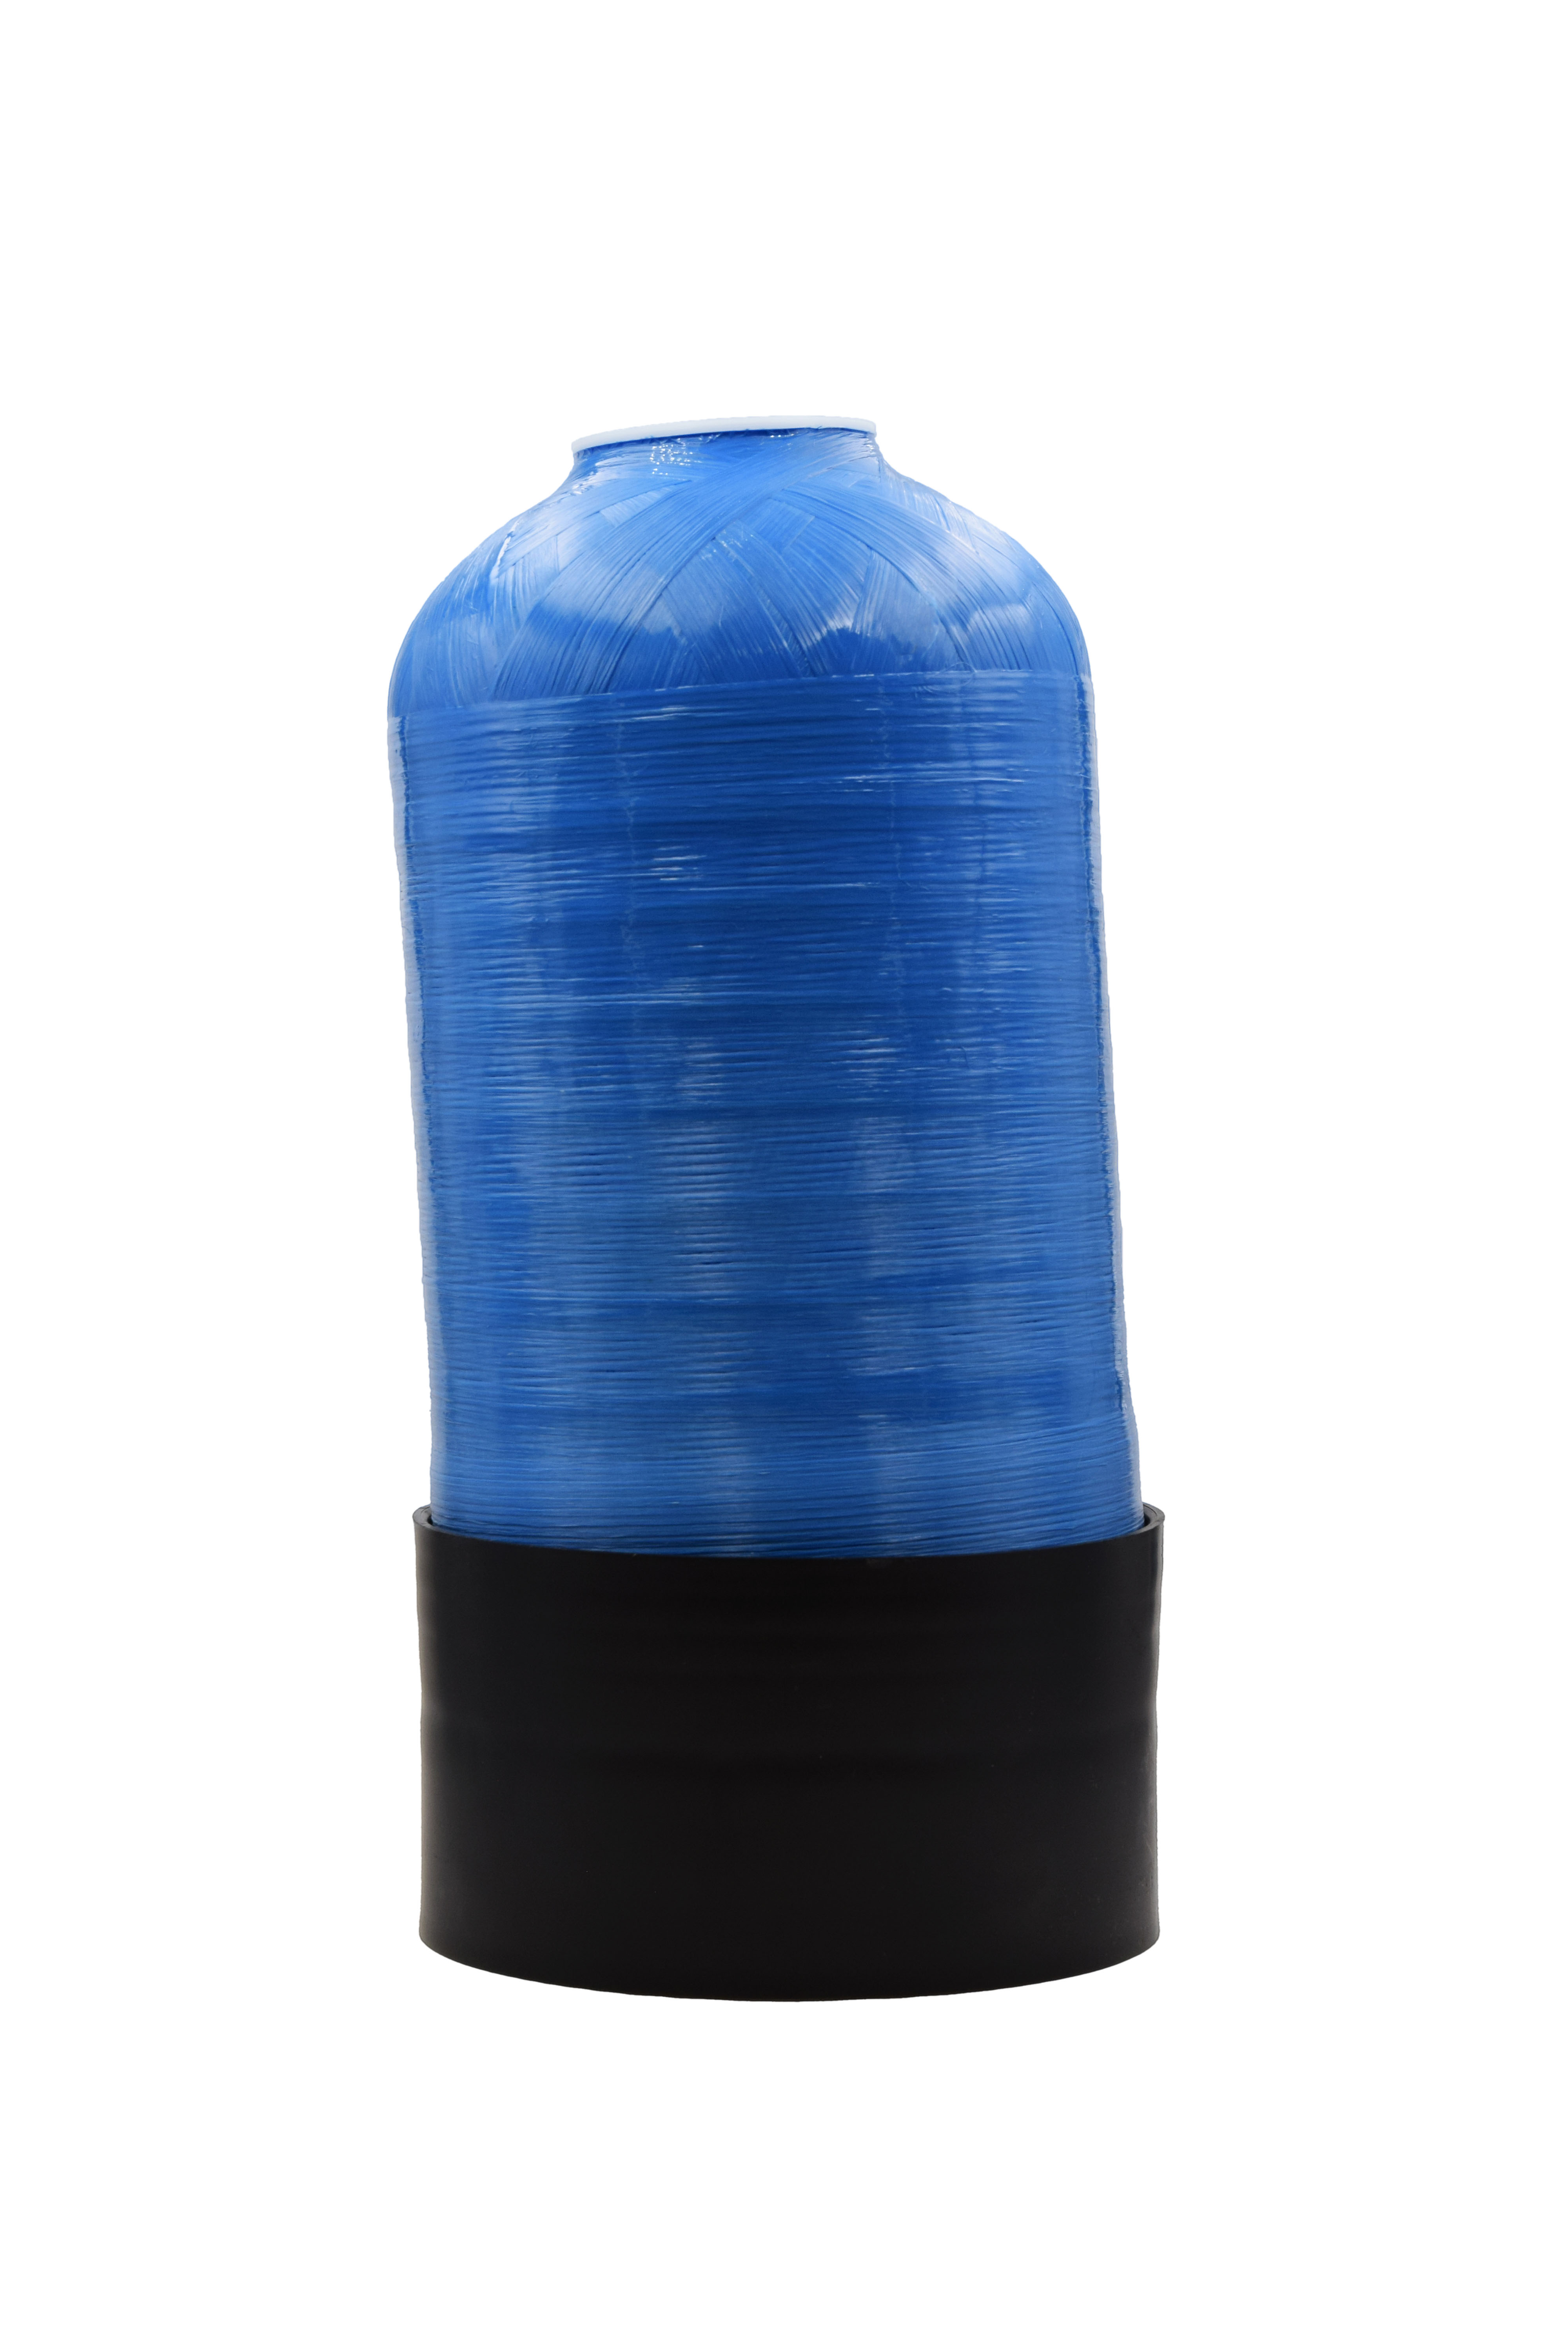 15 Liter Plastic Mixed Bed Demineralization Cartridge Filled with Premium Resin